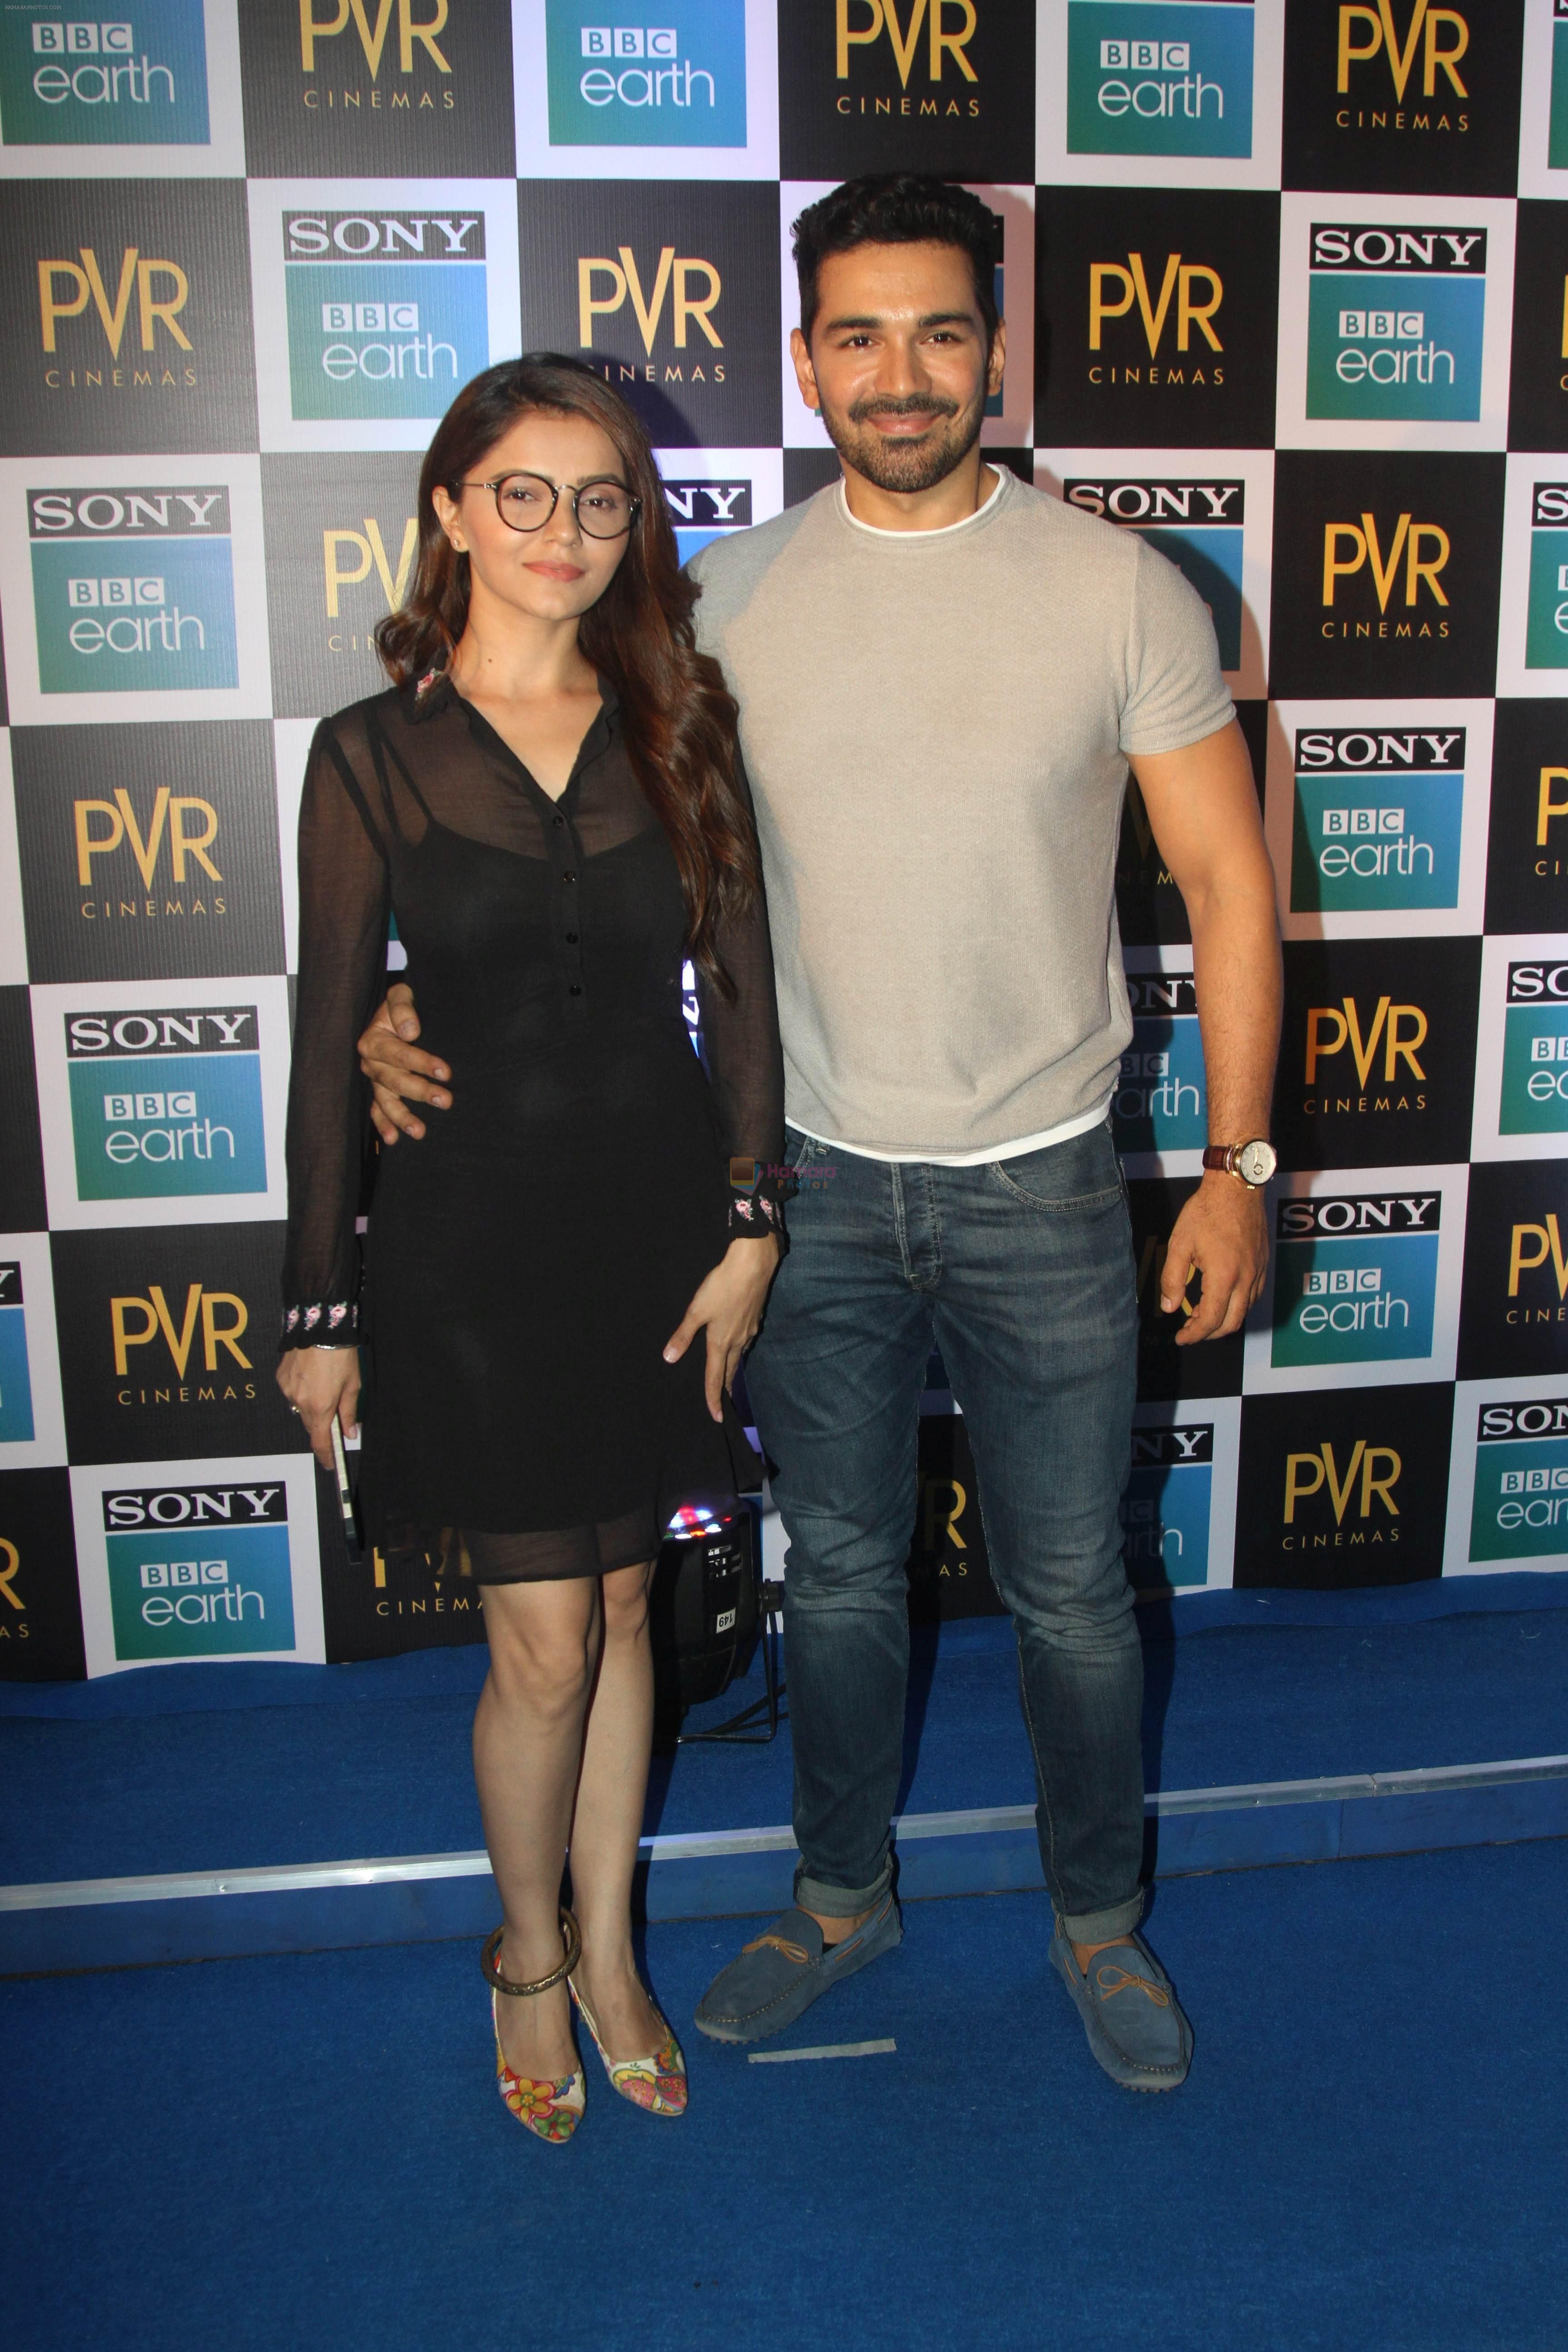 Rubina Dilaik at the Screening of Sony BBC Earth's film Blue Planet 2 at pvr icon in andheri on 15th May 2018